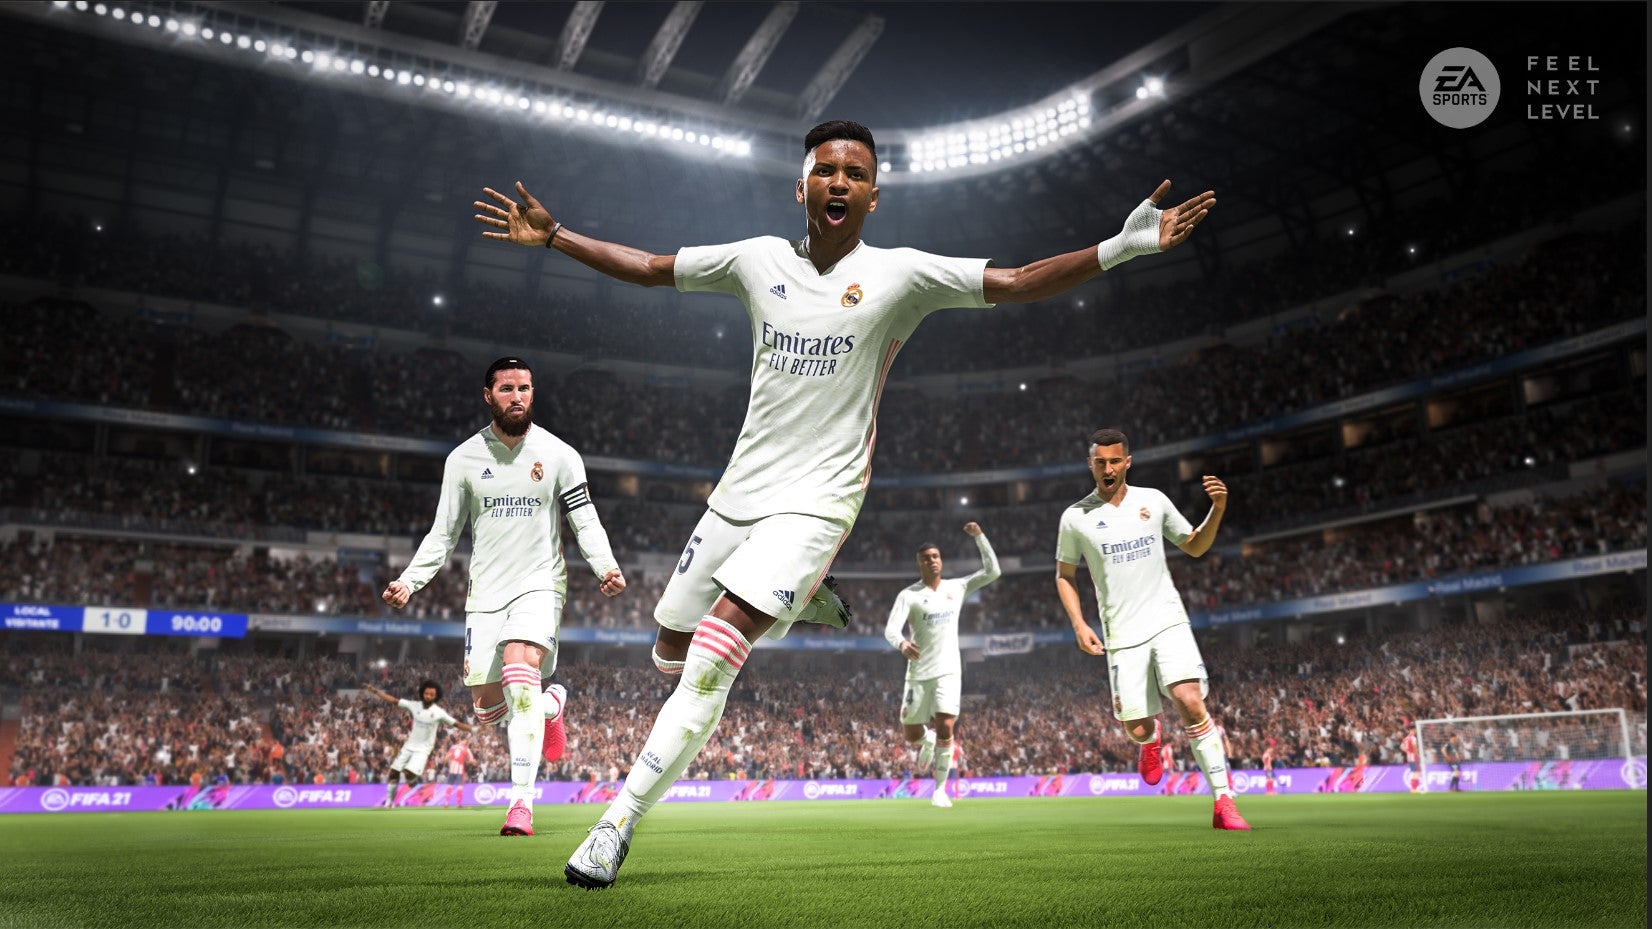 Image for Free FIFA 21 Ultimate Team pack now available with Prime Gaming